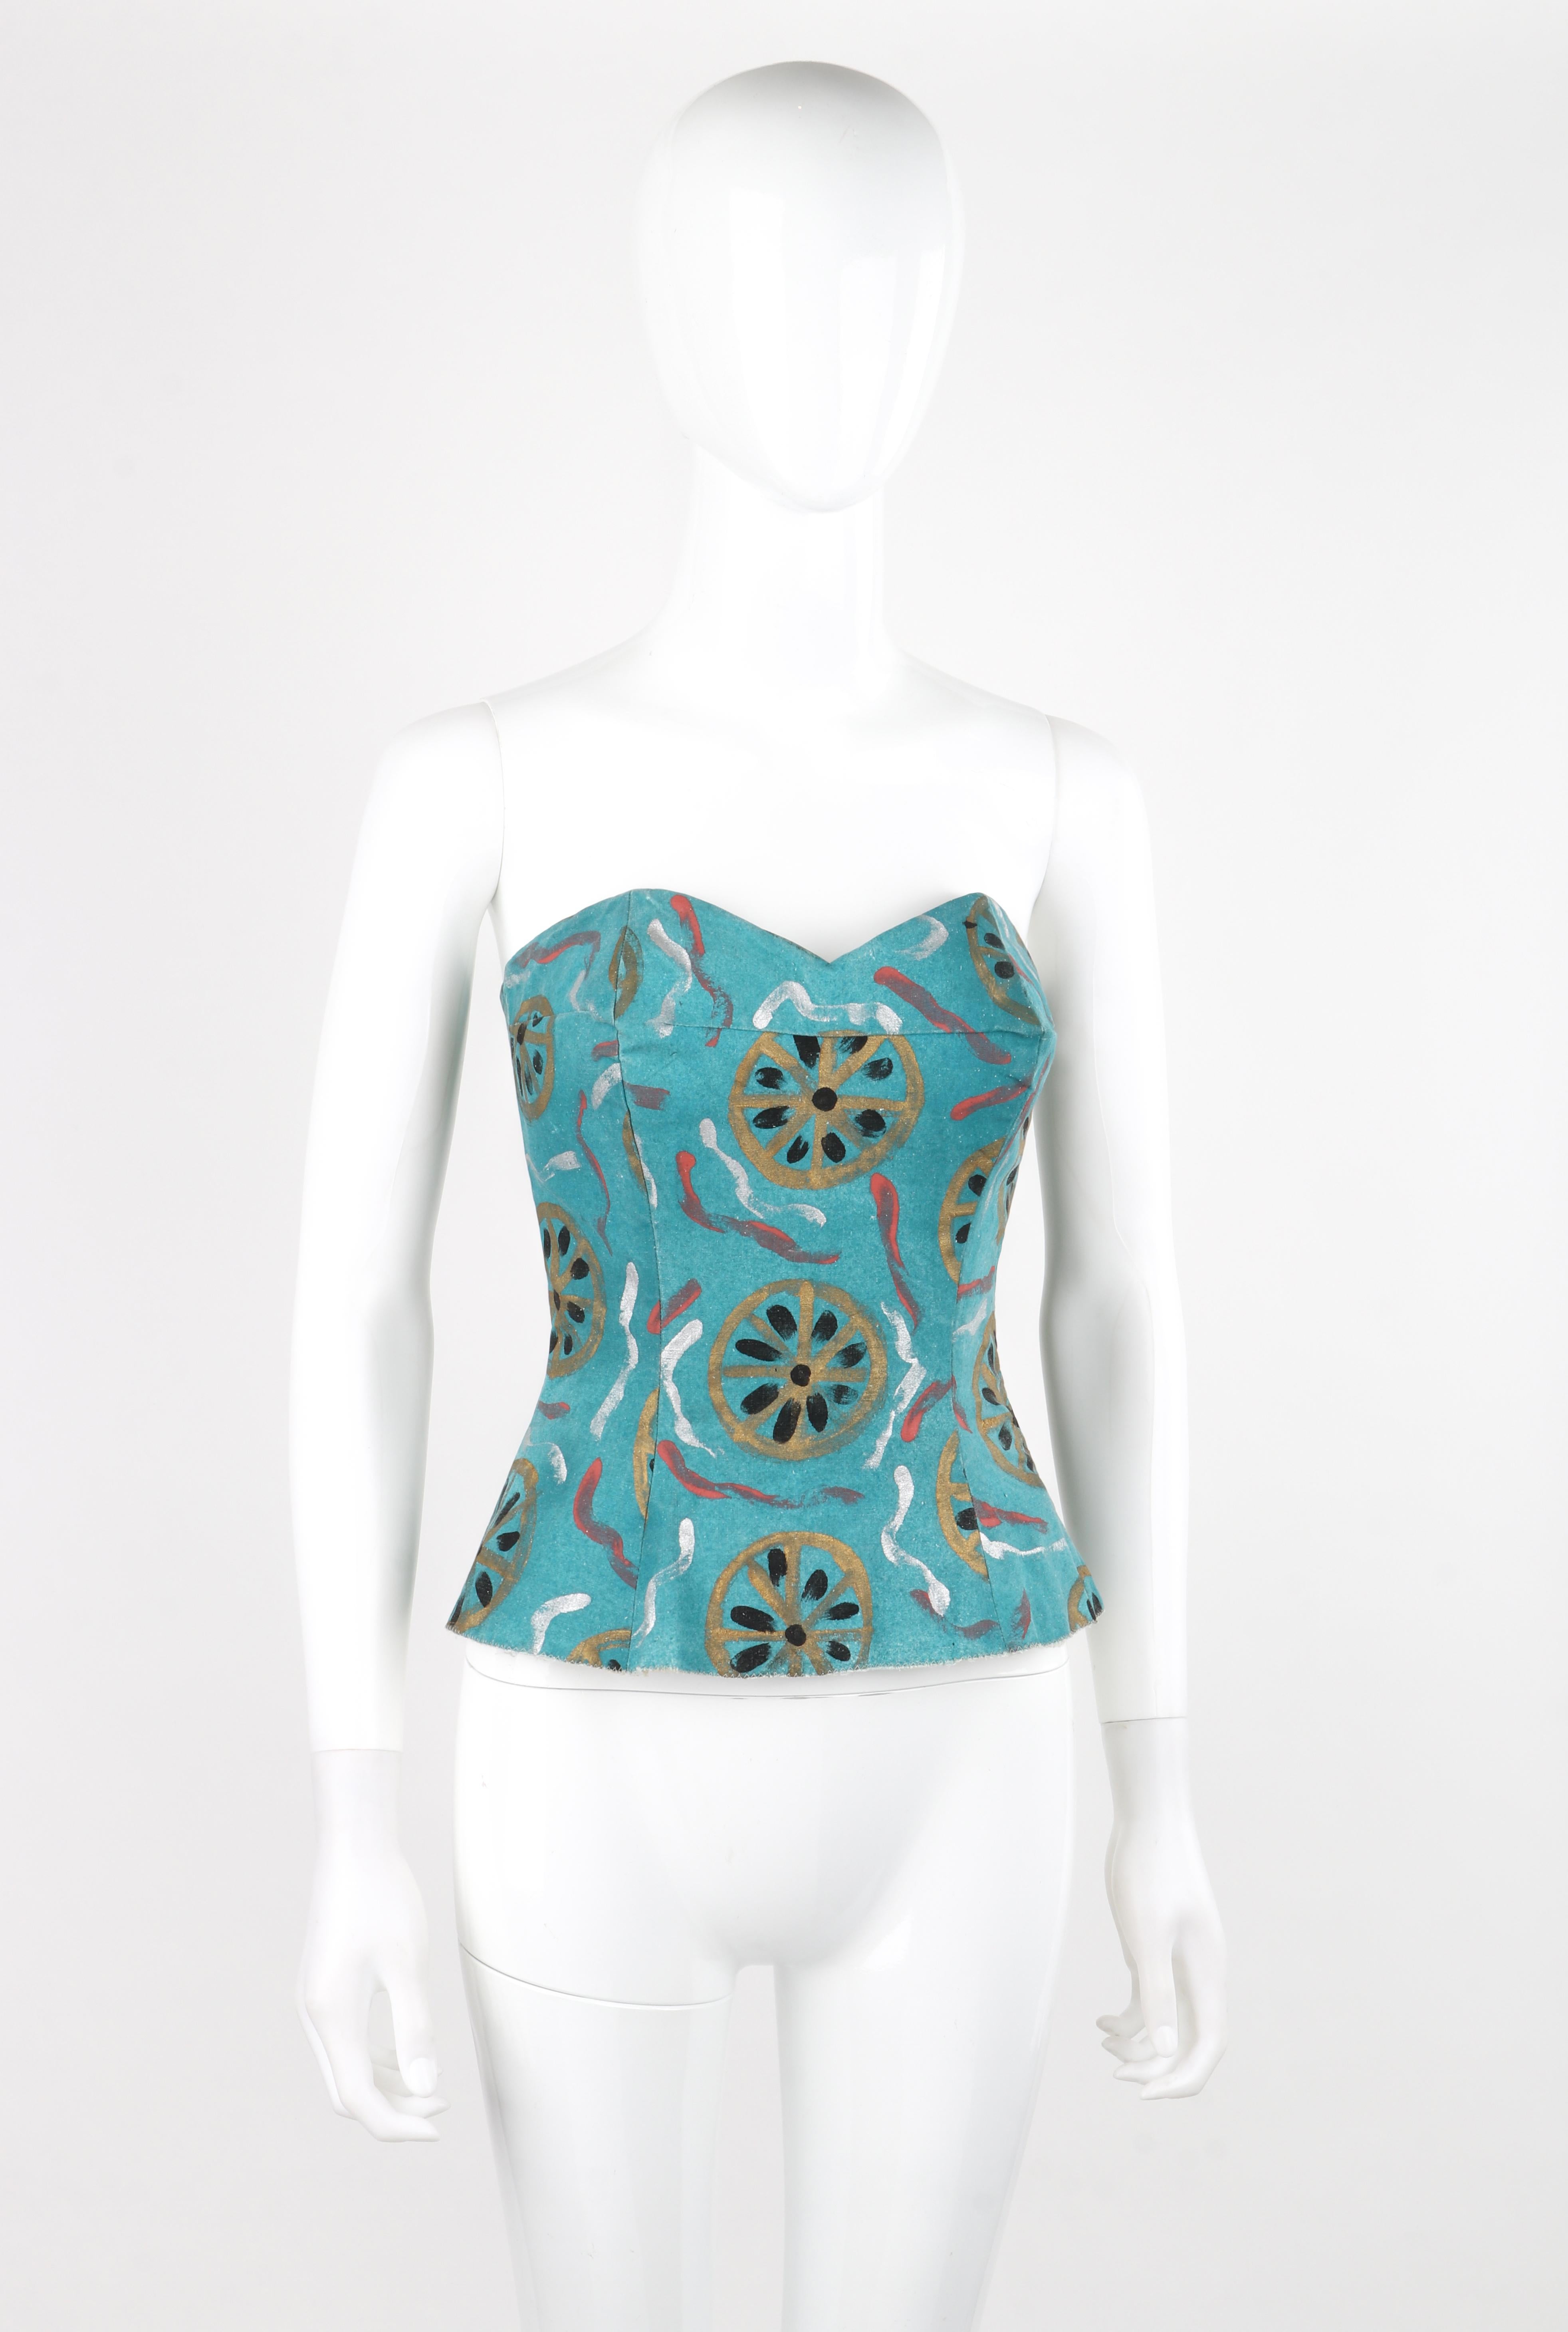 EMILIO PUCCI c.1954 Vtg Teal Cotton Fitted Hand Painted Bustier Sun Top RARE For Sale 2